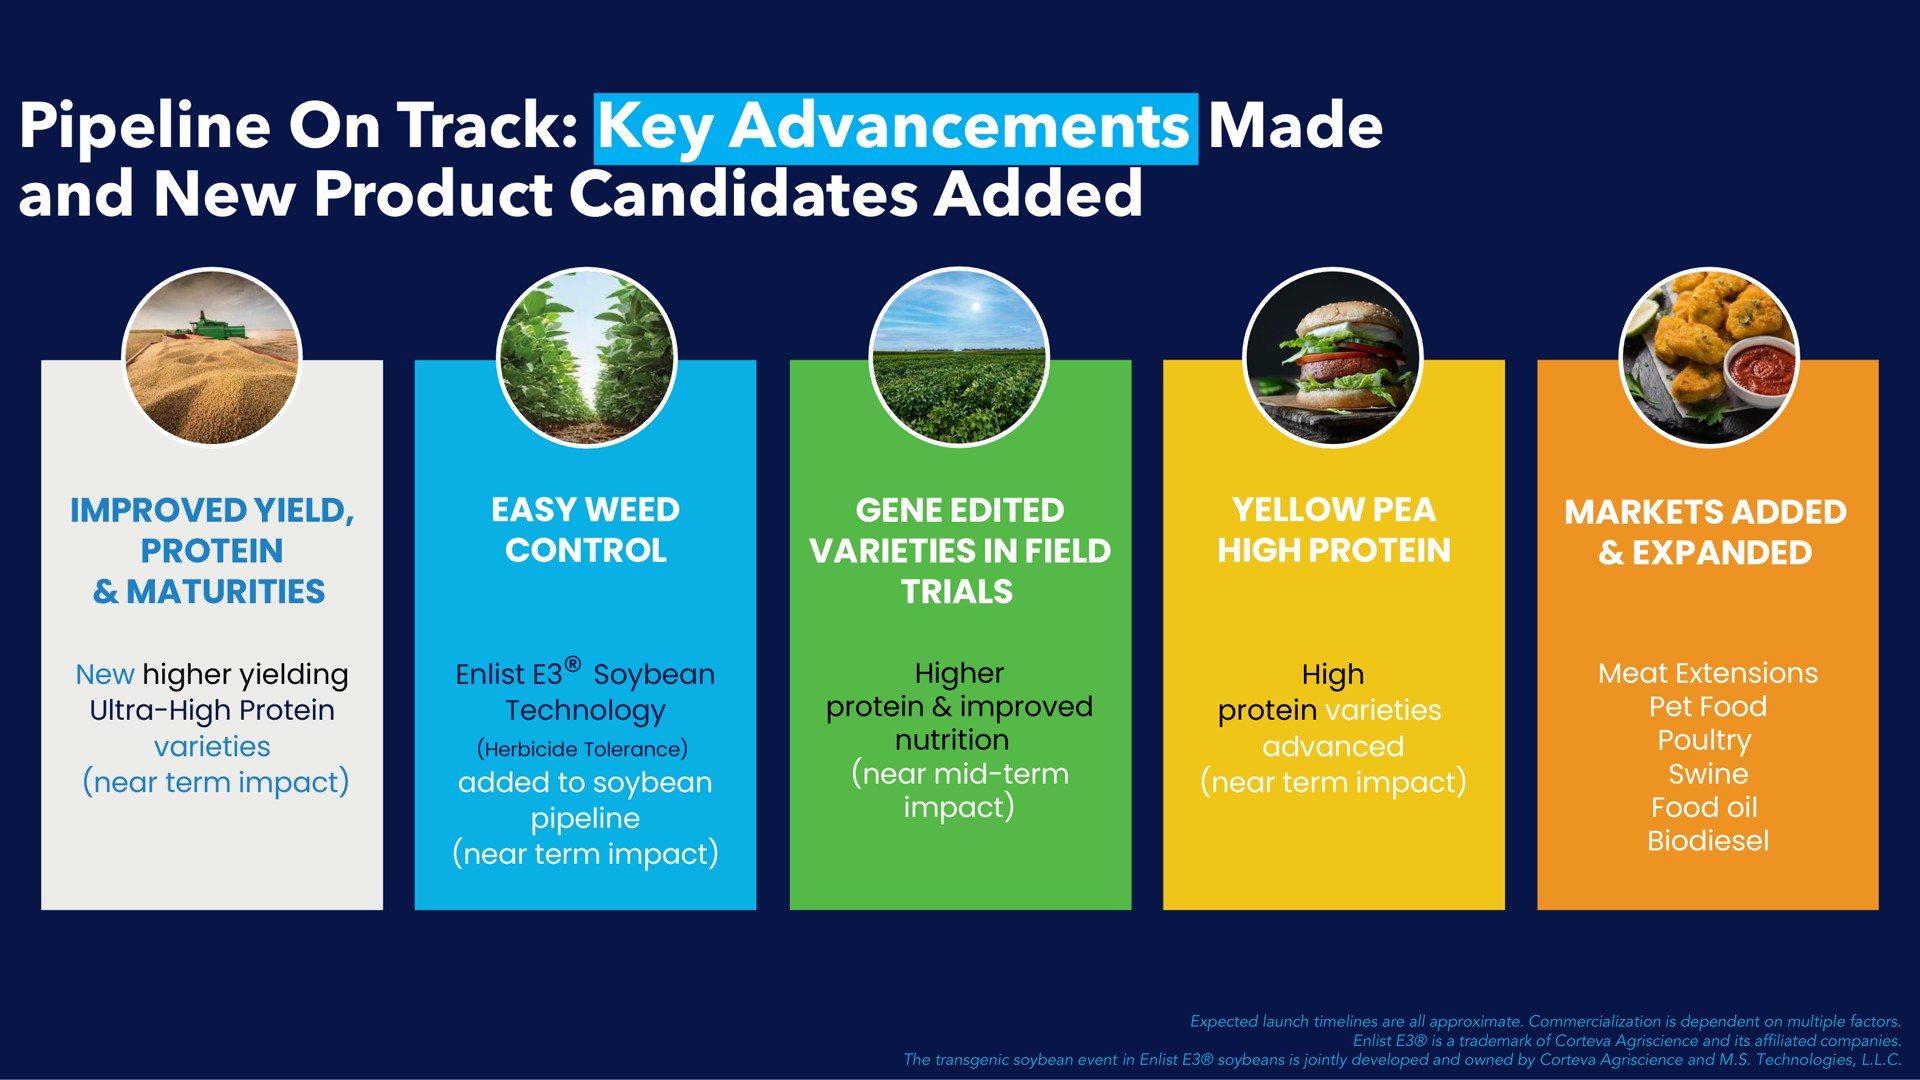 pipeline on track key advancements made and new product candidates added improved yield protein maturities easy weed control gene edited varieties in field trials yellow pea high protein markets added expanded a eon higher yielding higher enlist soybean | Benson Hill